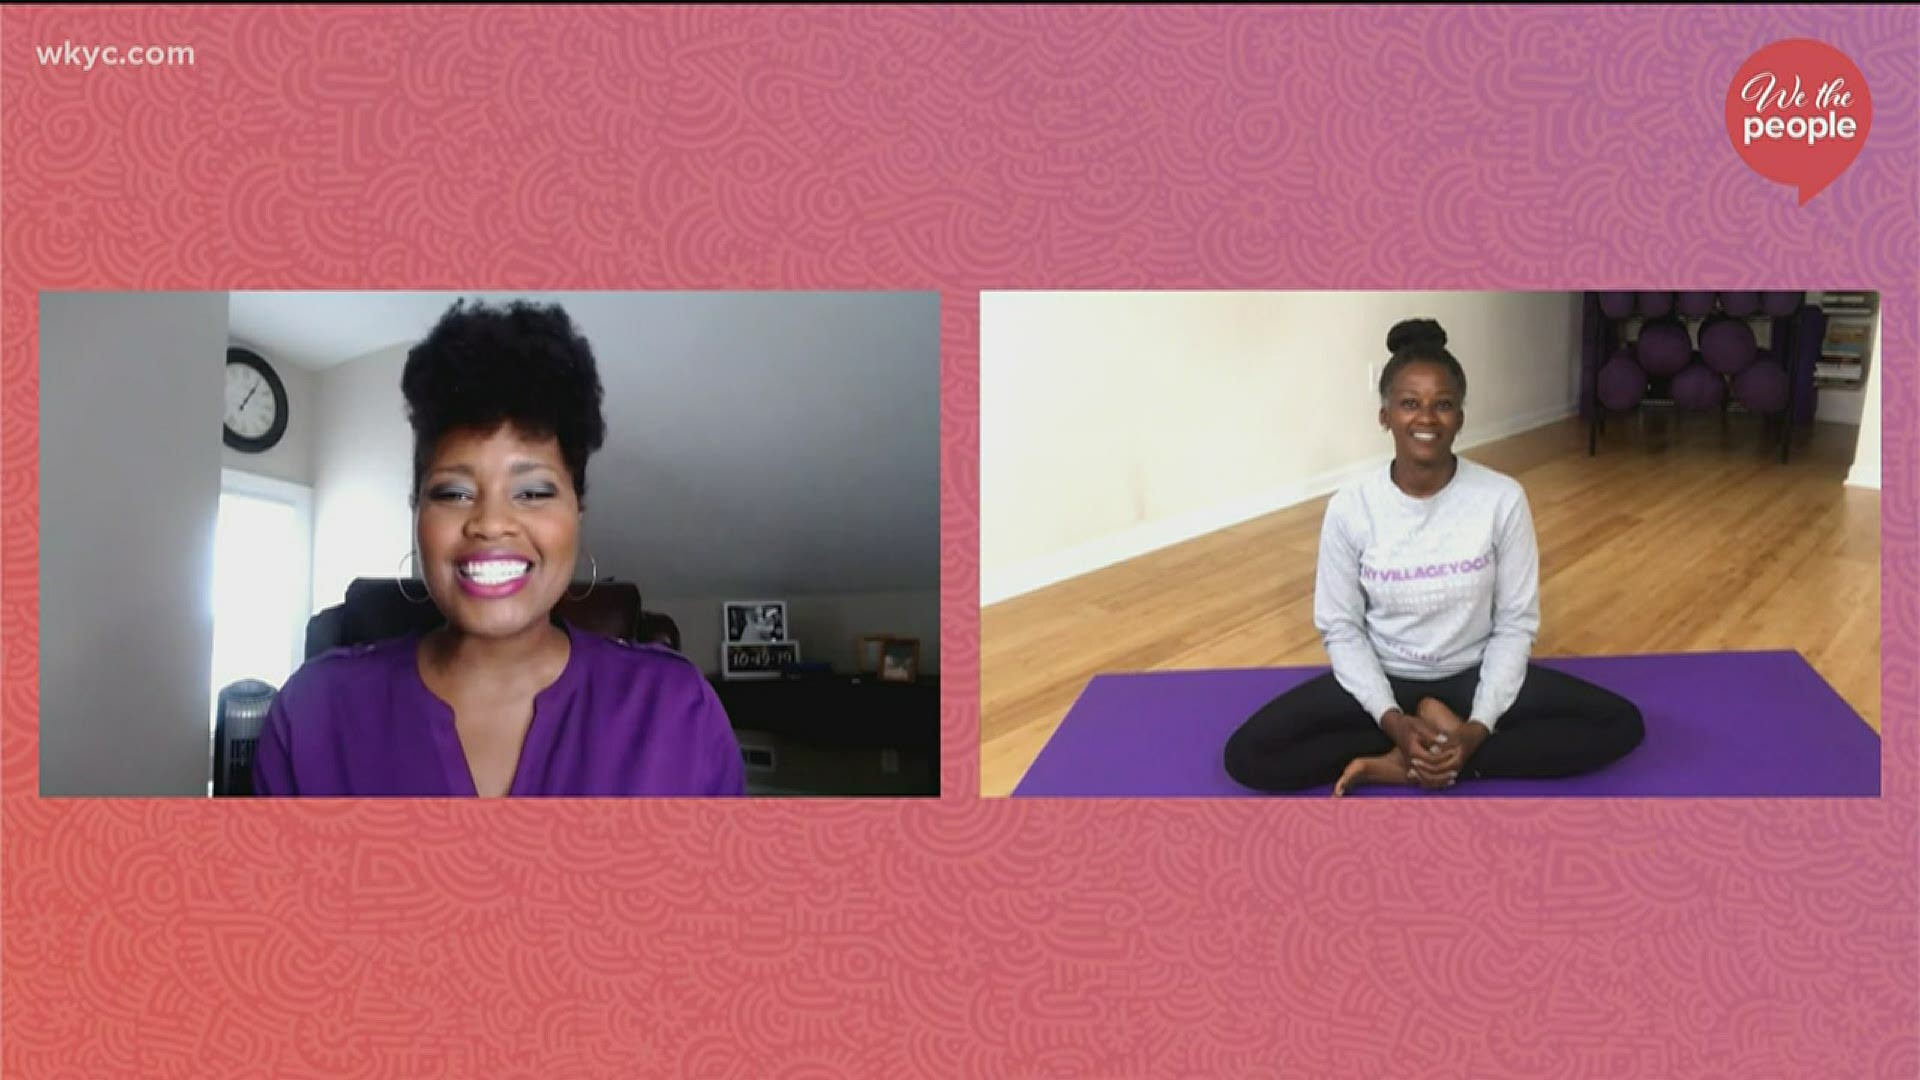 Relax and breathe with Kimberly Archibald Russell - Founder of MY VILLAGE YOGA.